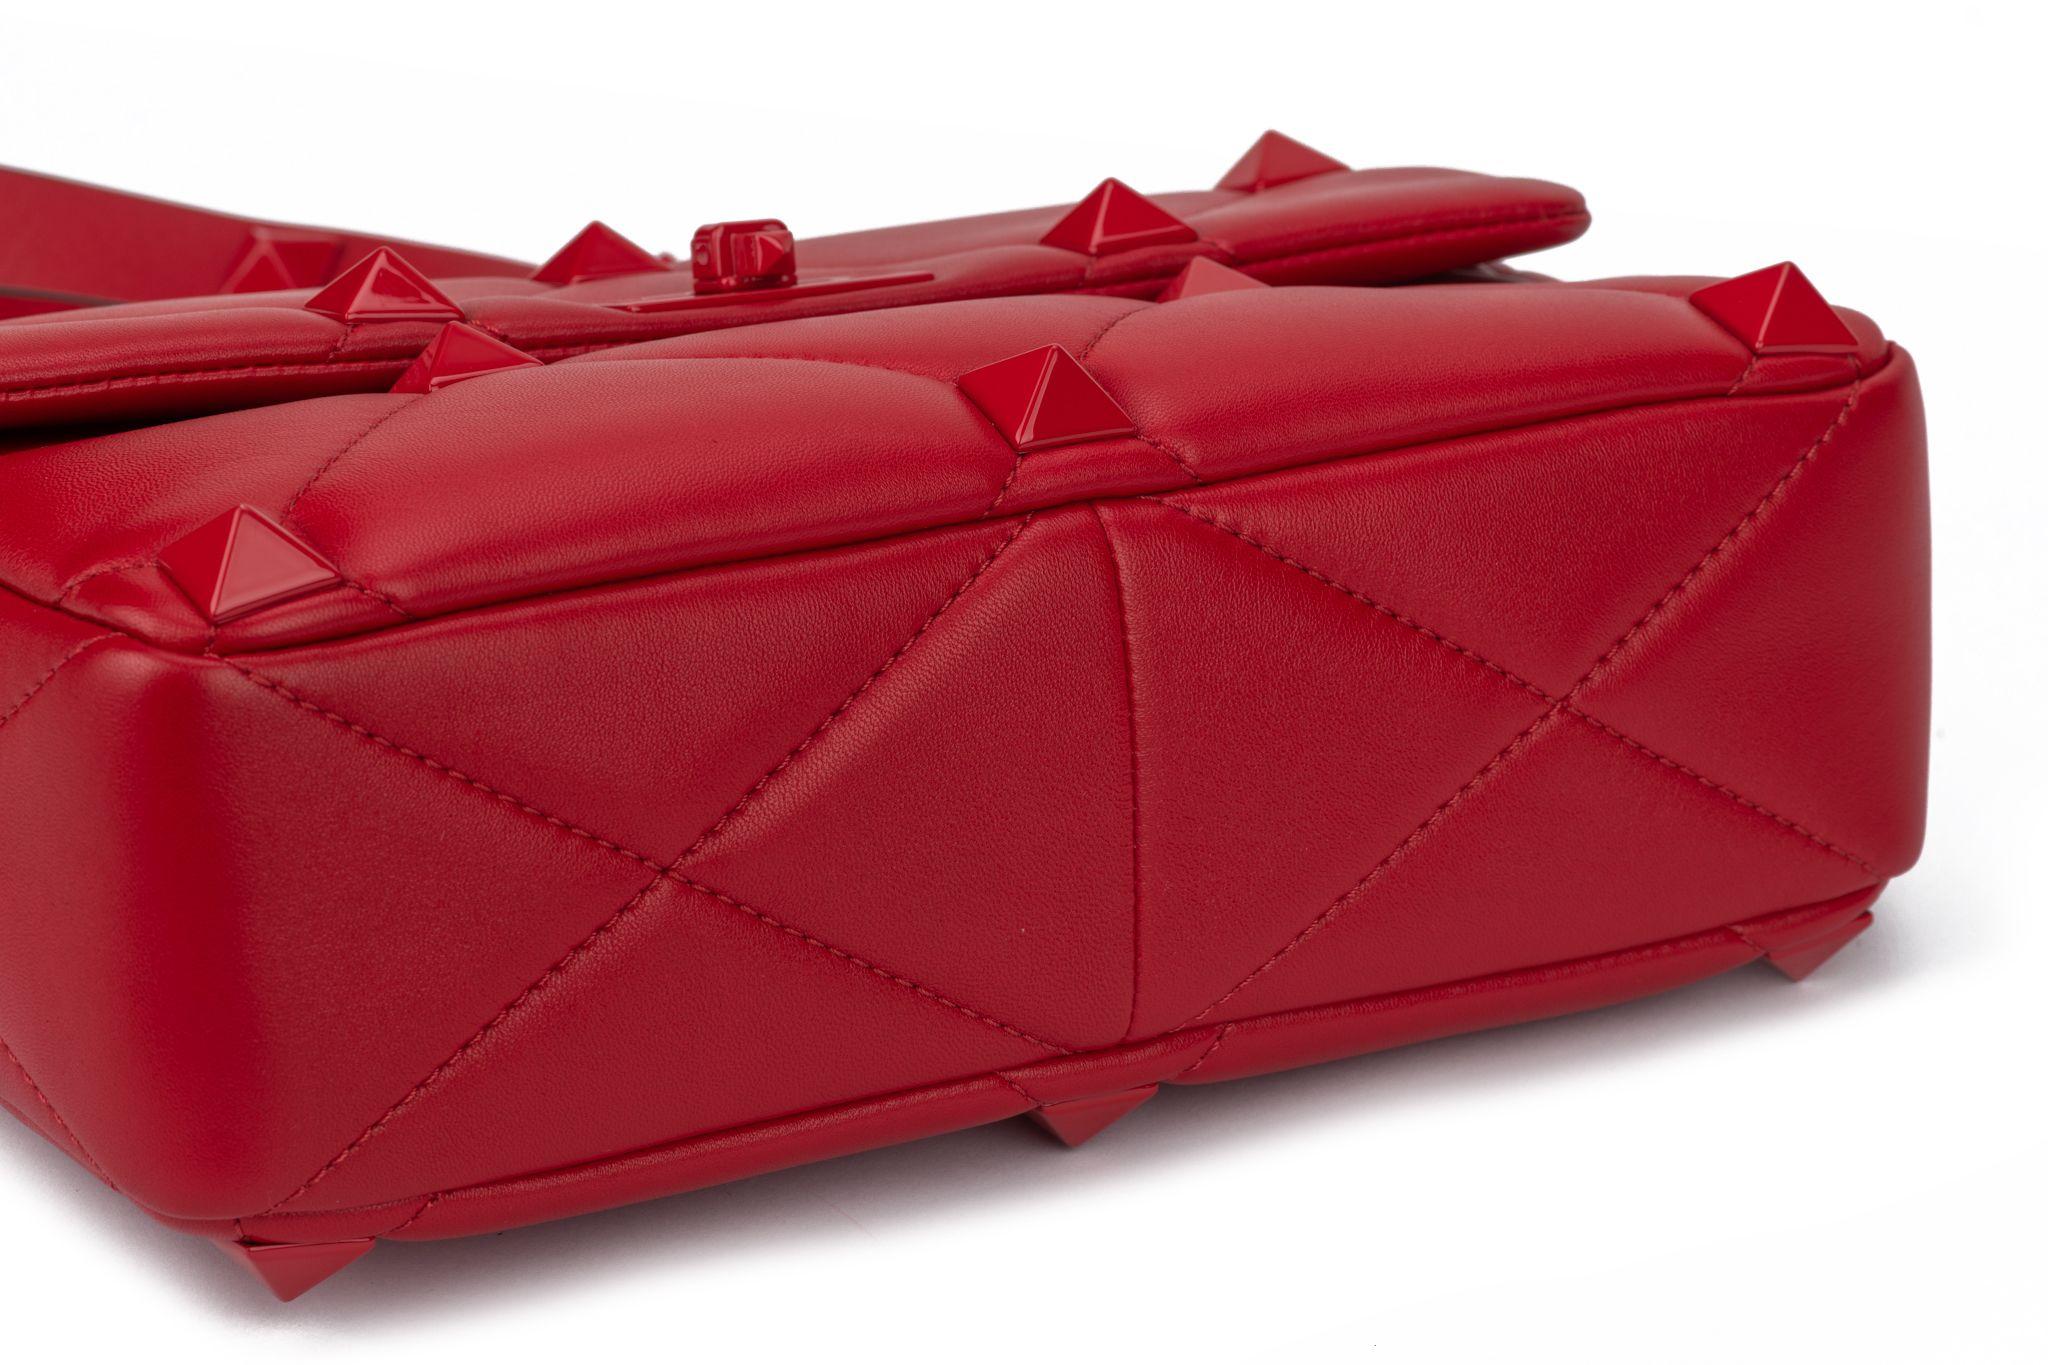 Valentino Roman Stud Collection in red lambskin leather. Diamond-quilted shoulder bag with tonal studs and a versatile top handle and crossbody strap combination. Handle drop 3.5”, detachable shoulder strap 19”. The bag is new and comes with the